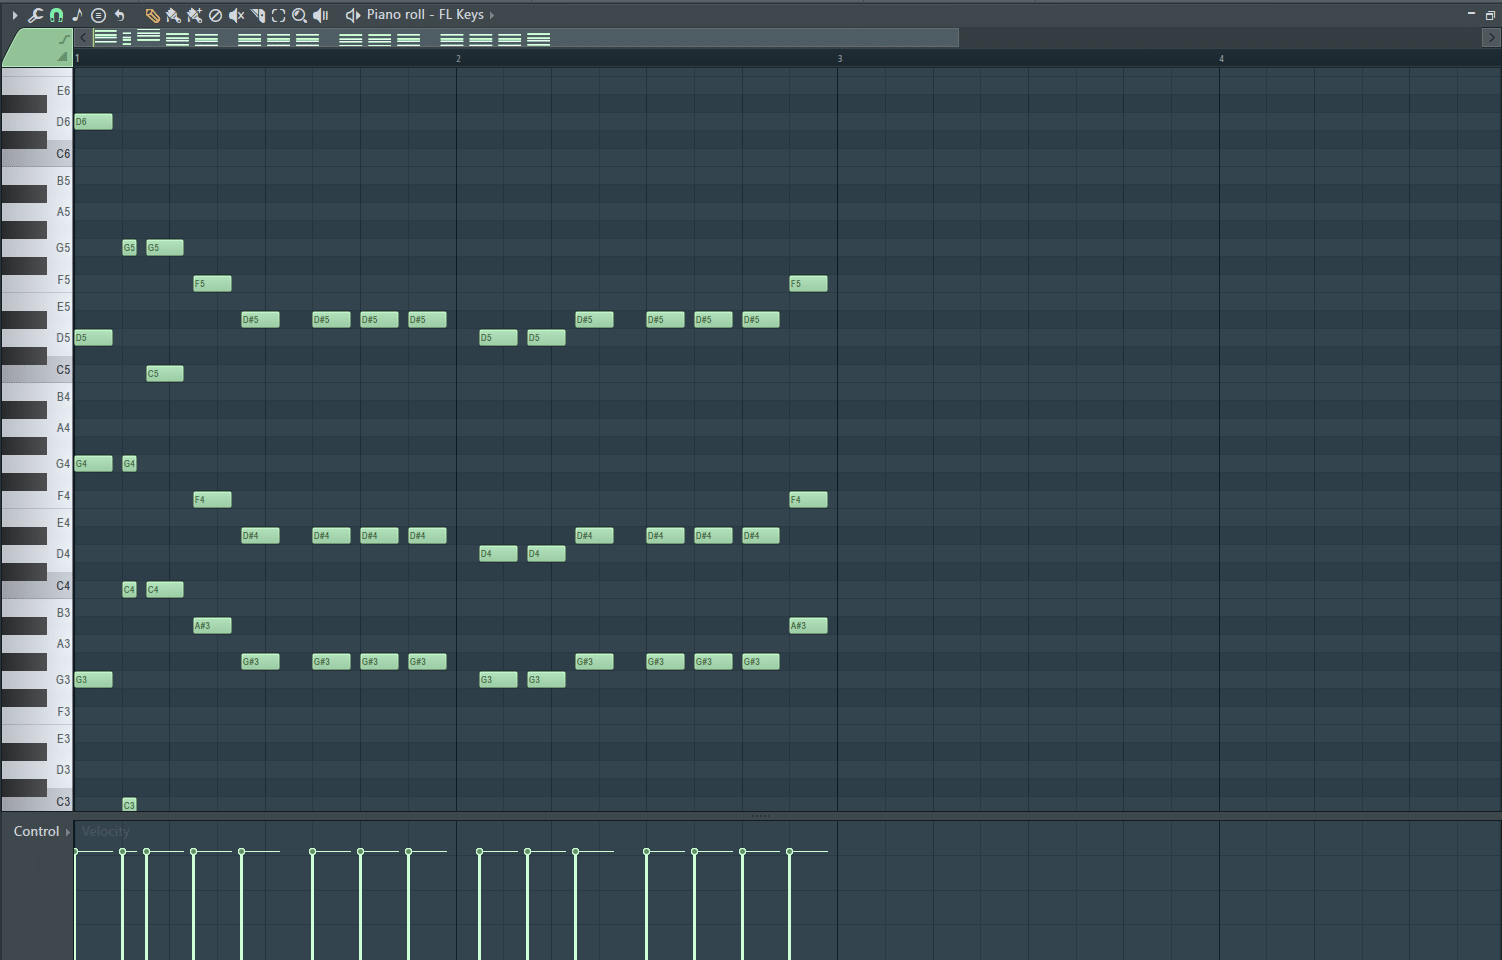 The Piano Roll assigned to the plugin "FL Keys"